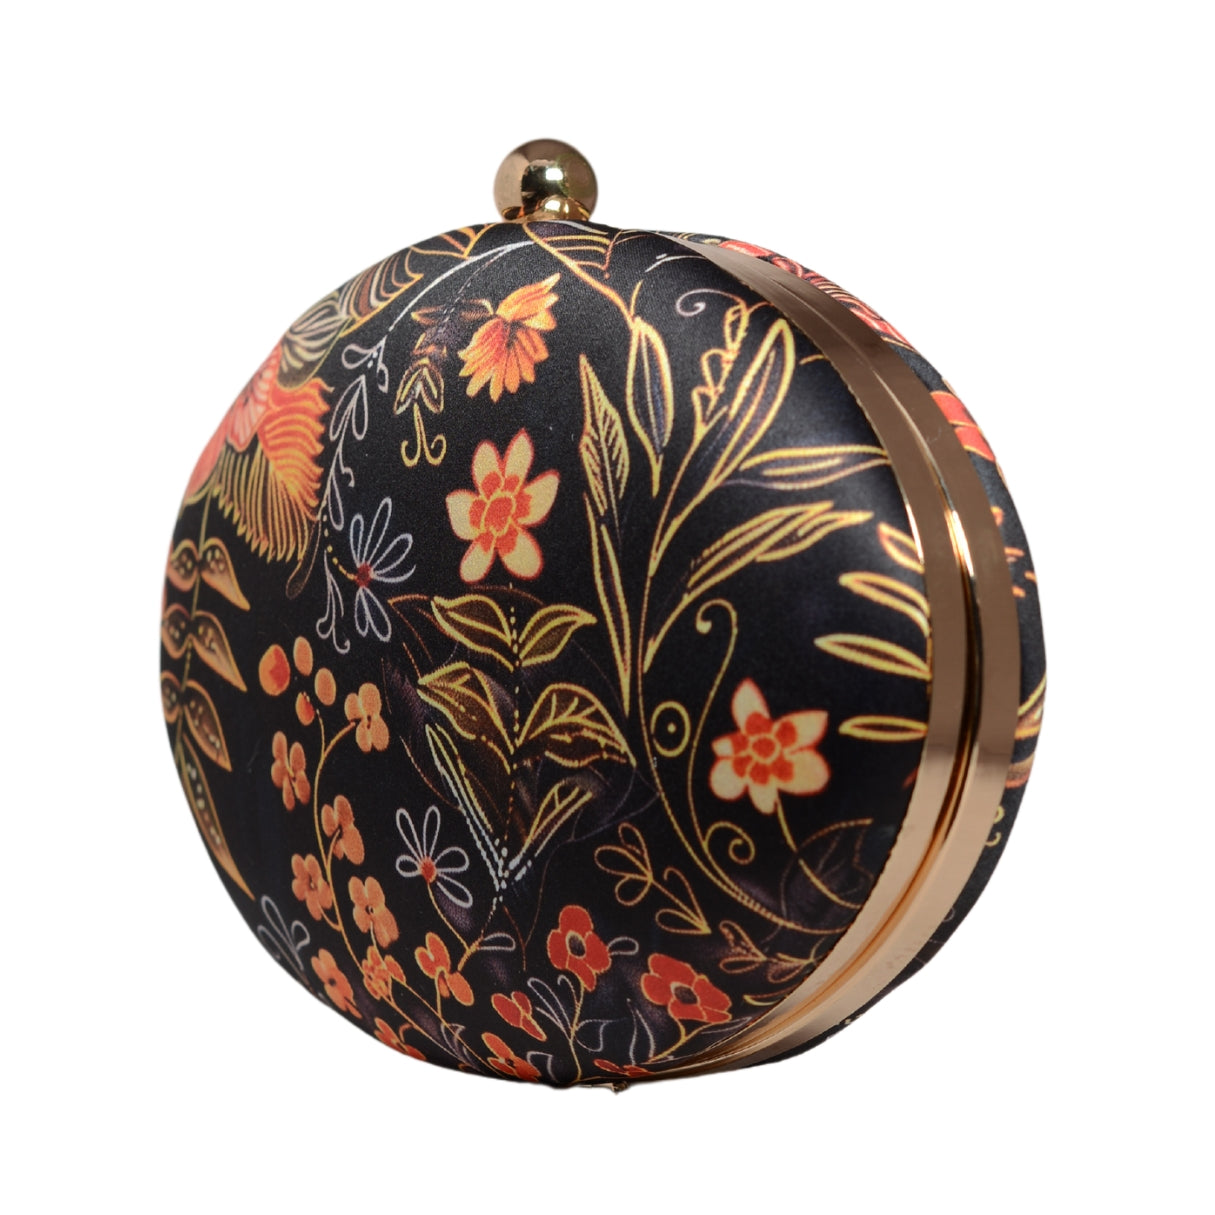 Orange Floral And Leaves Printed Oval Clutch